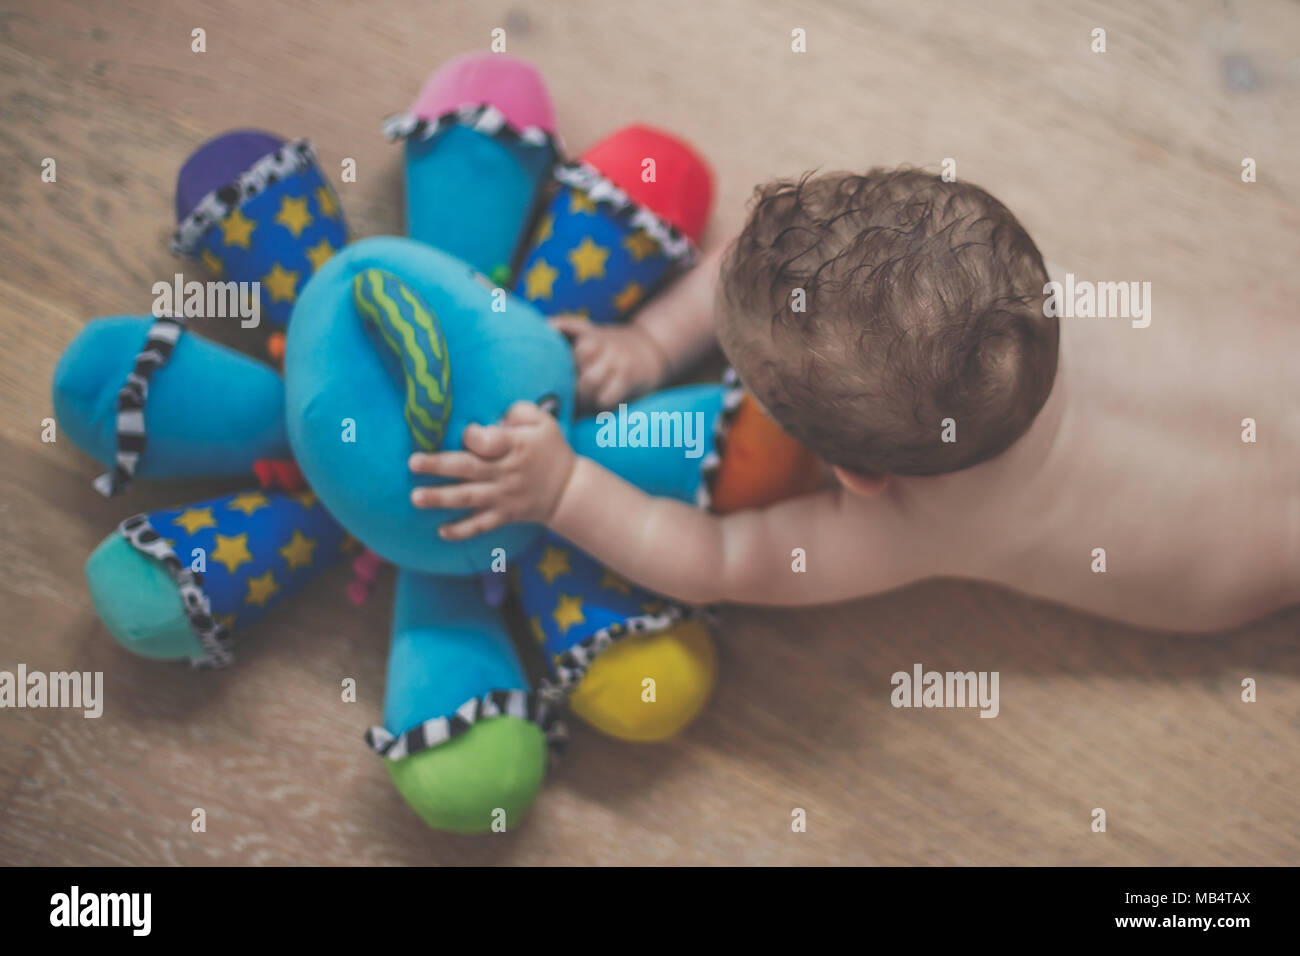 6 month old baby boy playing on the floor with a brightly colored toy Stock Photo